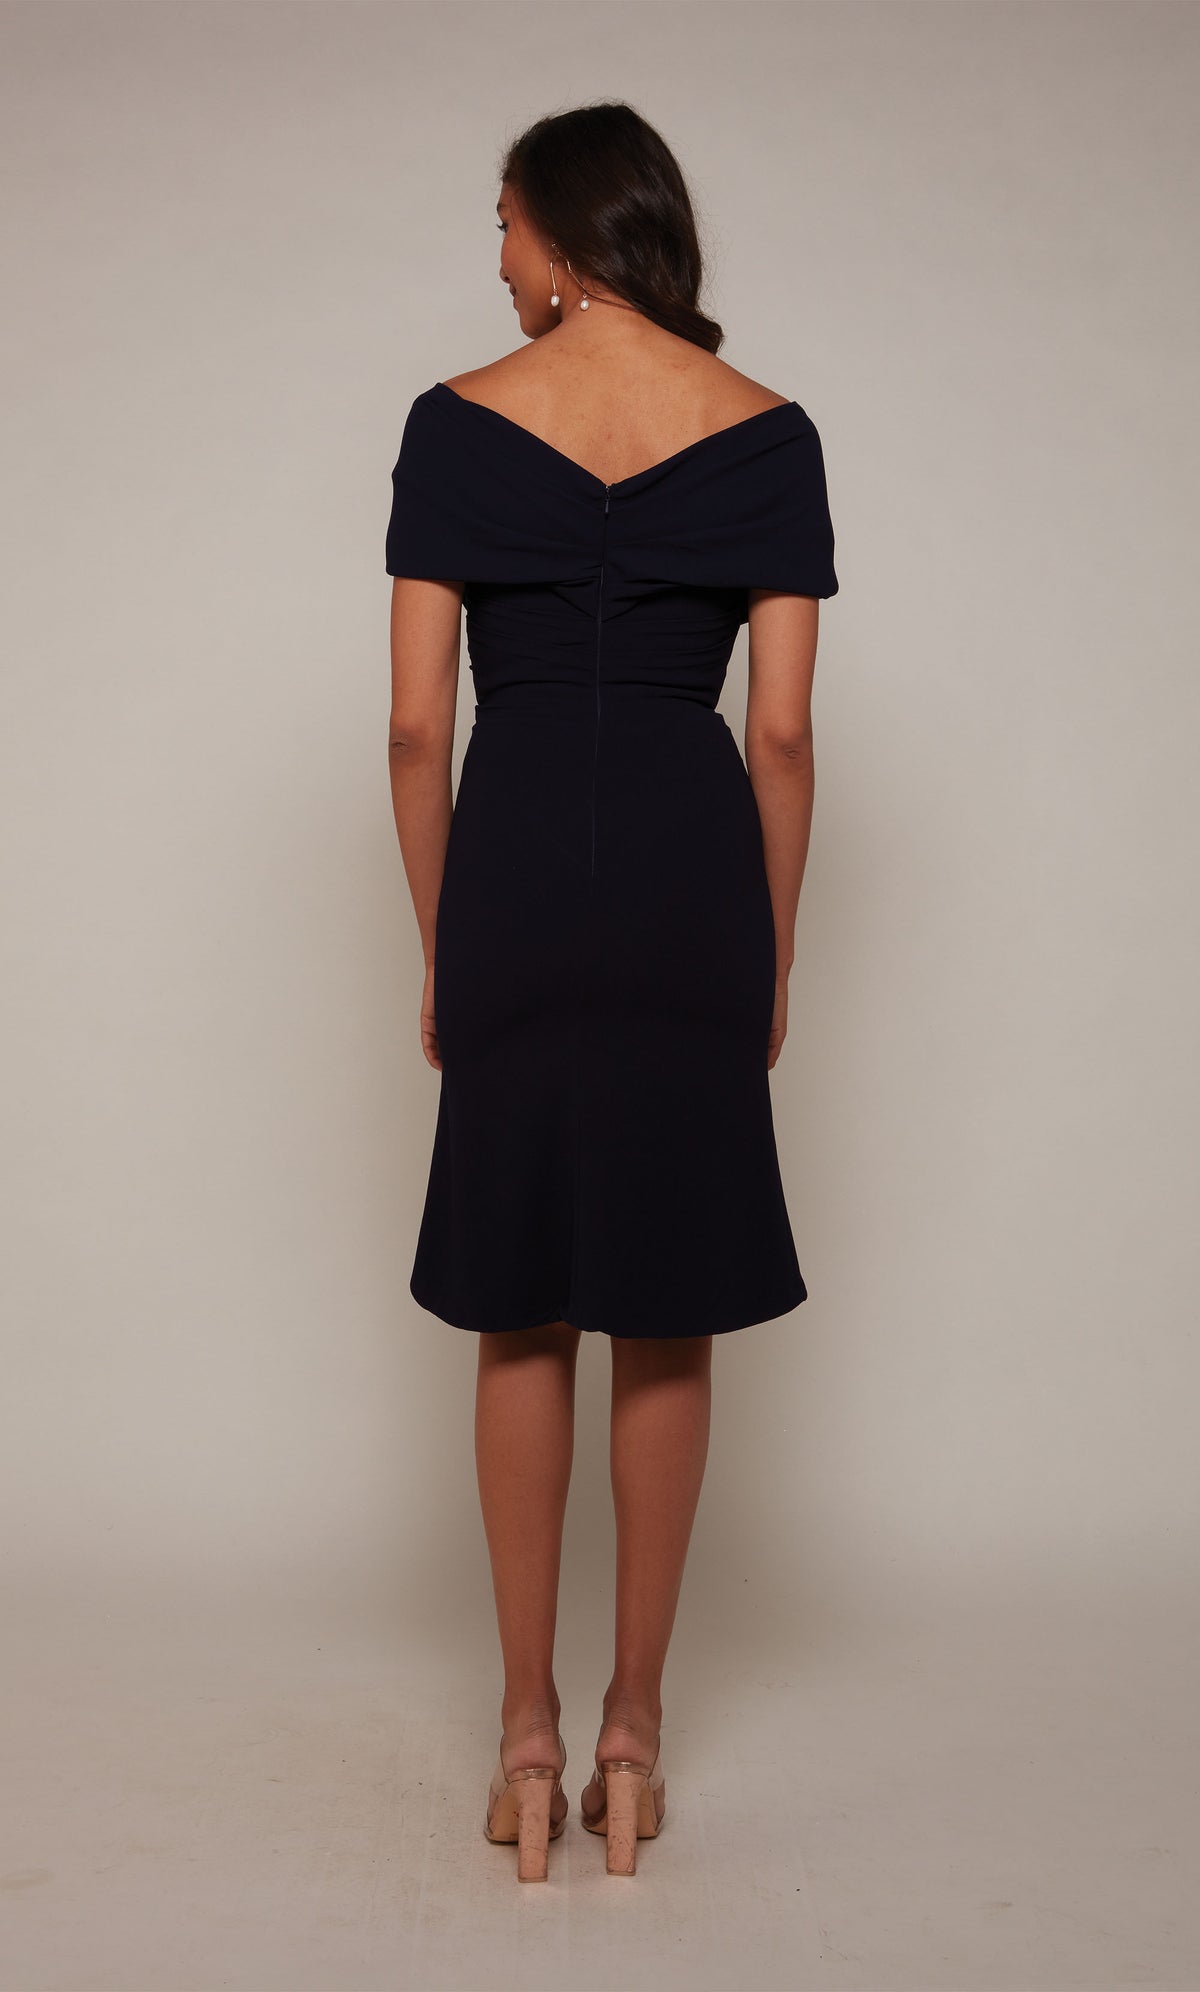 A chic, knee length cocktail dress with an off the shoulder neckline, ruching detail, and a closed zipper back in midnight blue.